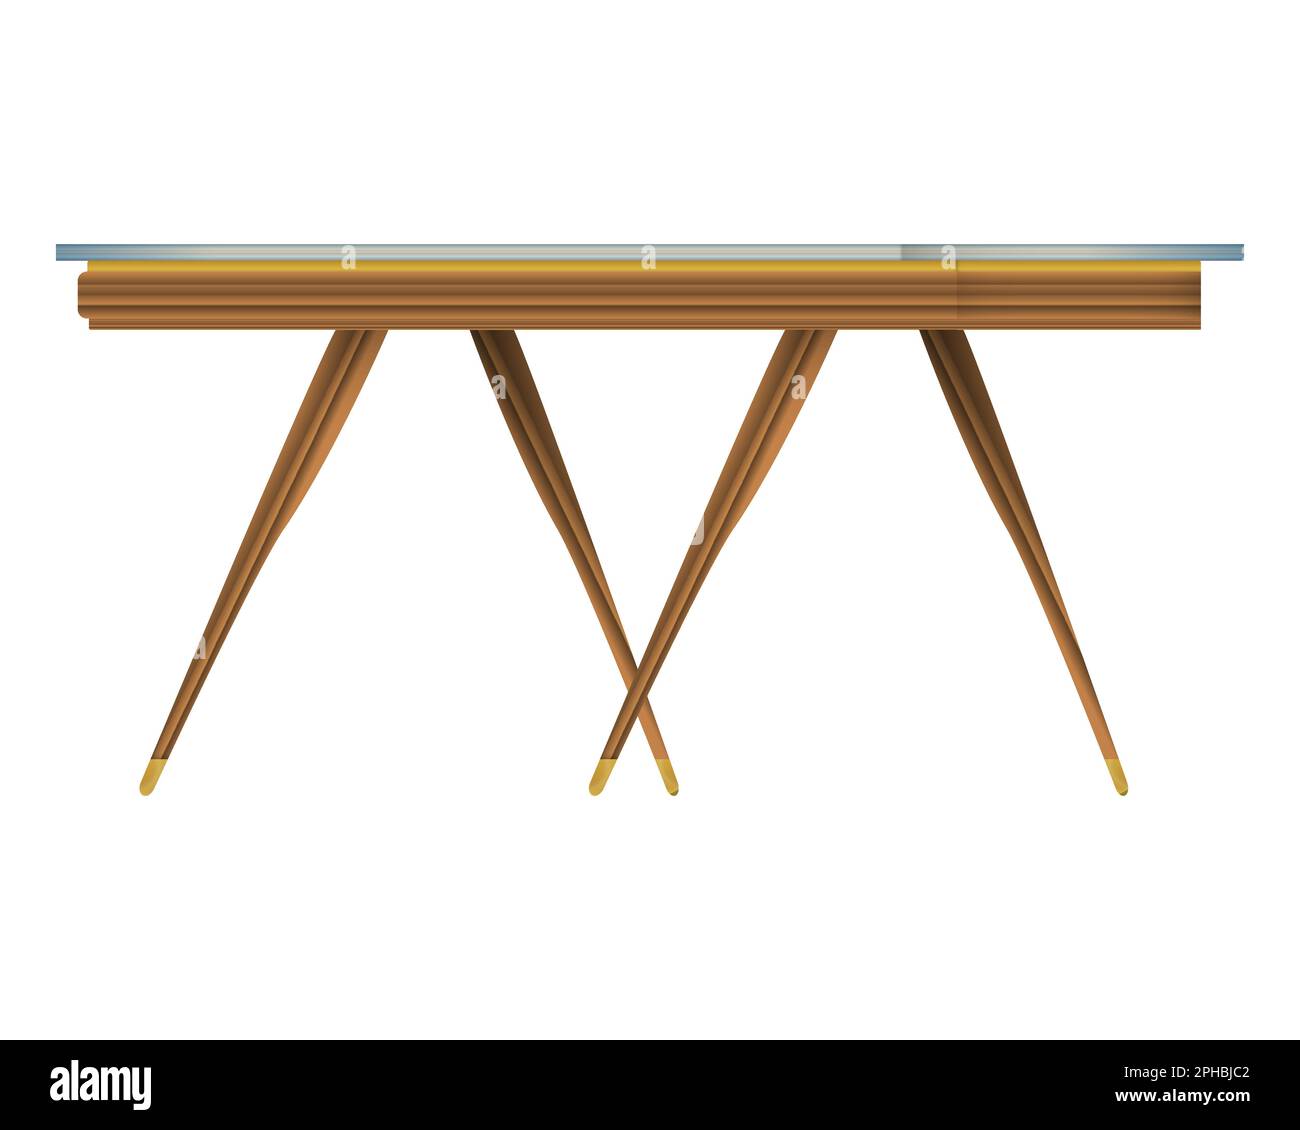 Glass tabletop wood table three-quarter view in realistic style. Transparent table top. Home wooden furniture design. Colorful vector illustration iso Stock Vector